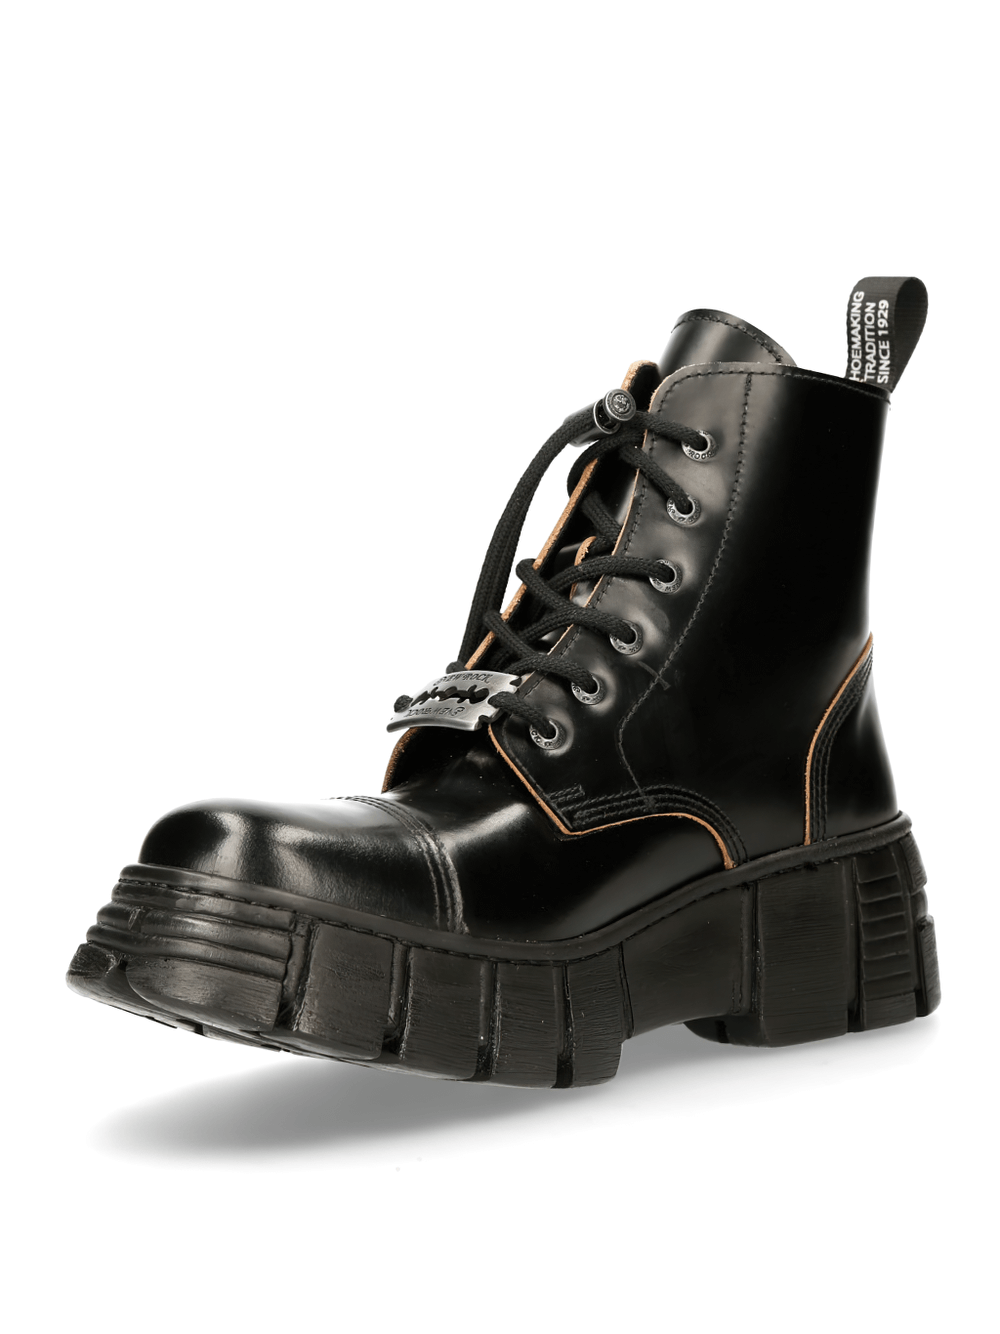 NEW ROCK Rugged Black Leather Lace-Up Ankle Boots